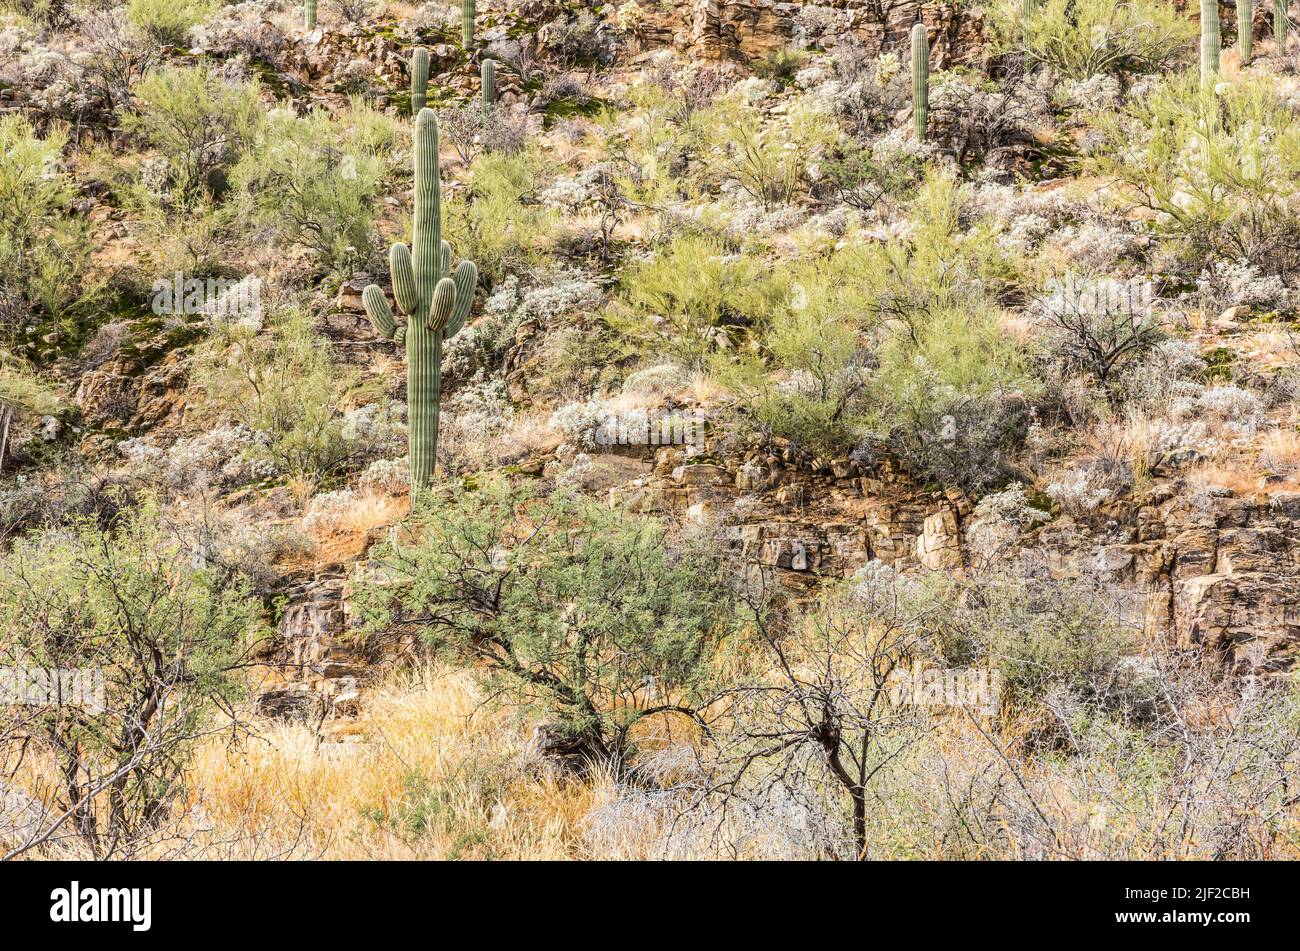 A hillside covered with desert plants and Saguaro cactus in Sabino Canyon Recreation area, Arizona. Stock Photo